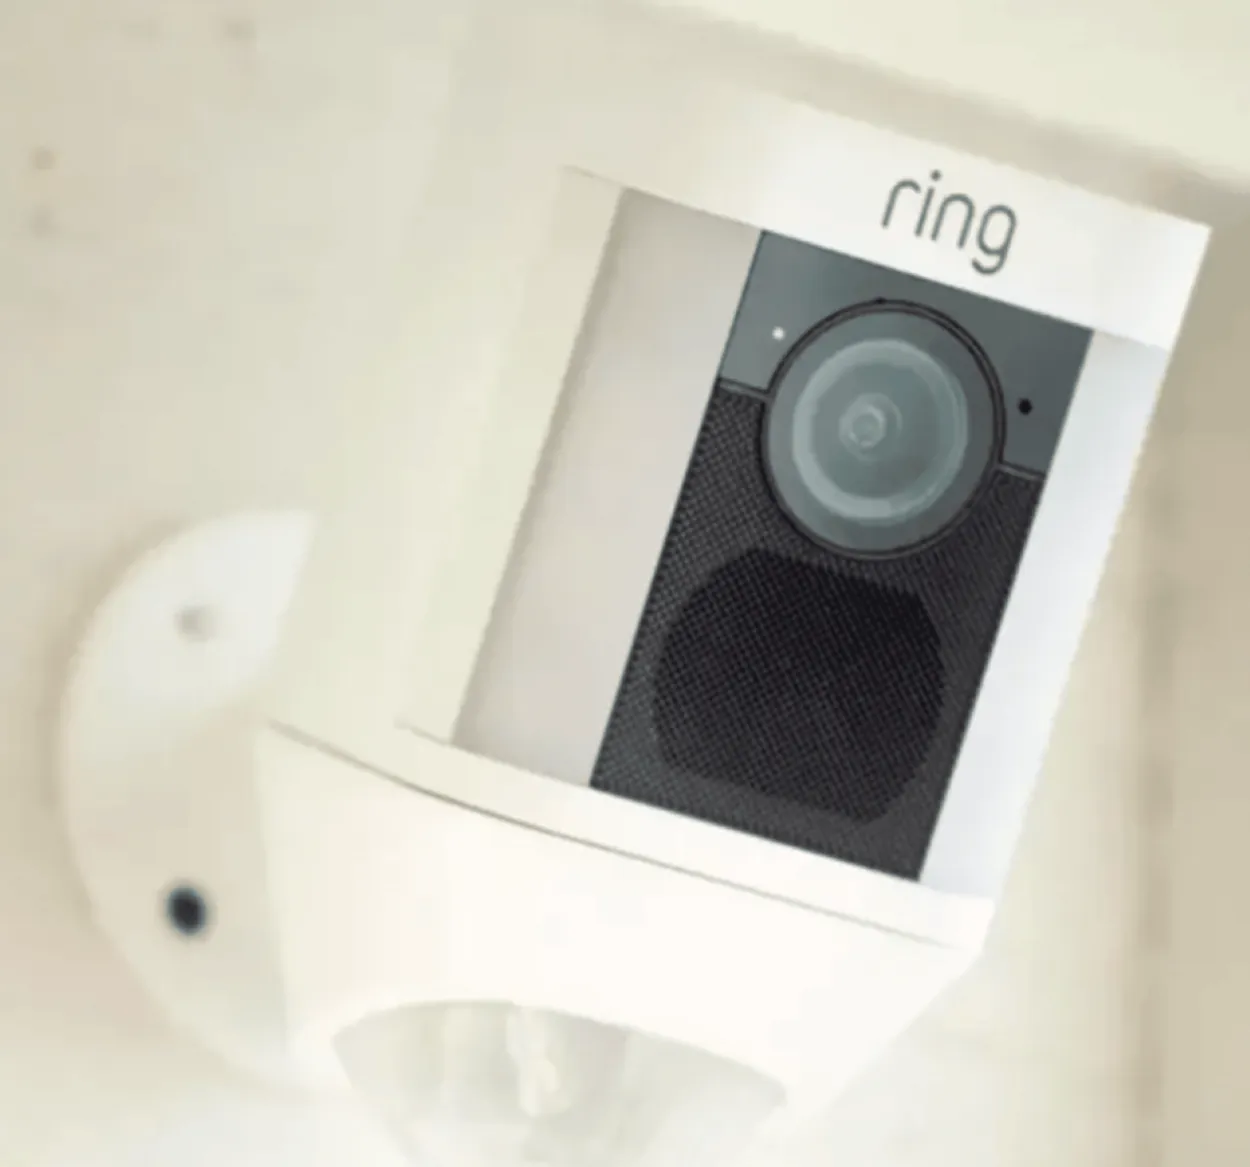 a ring camera which contain a alarm system with chimes